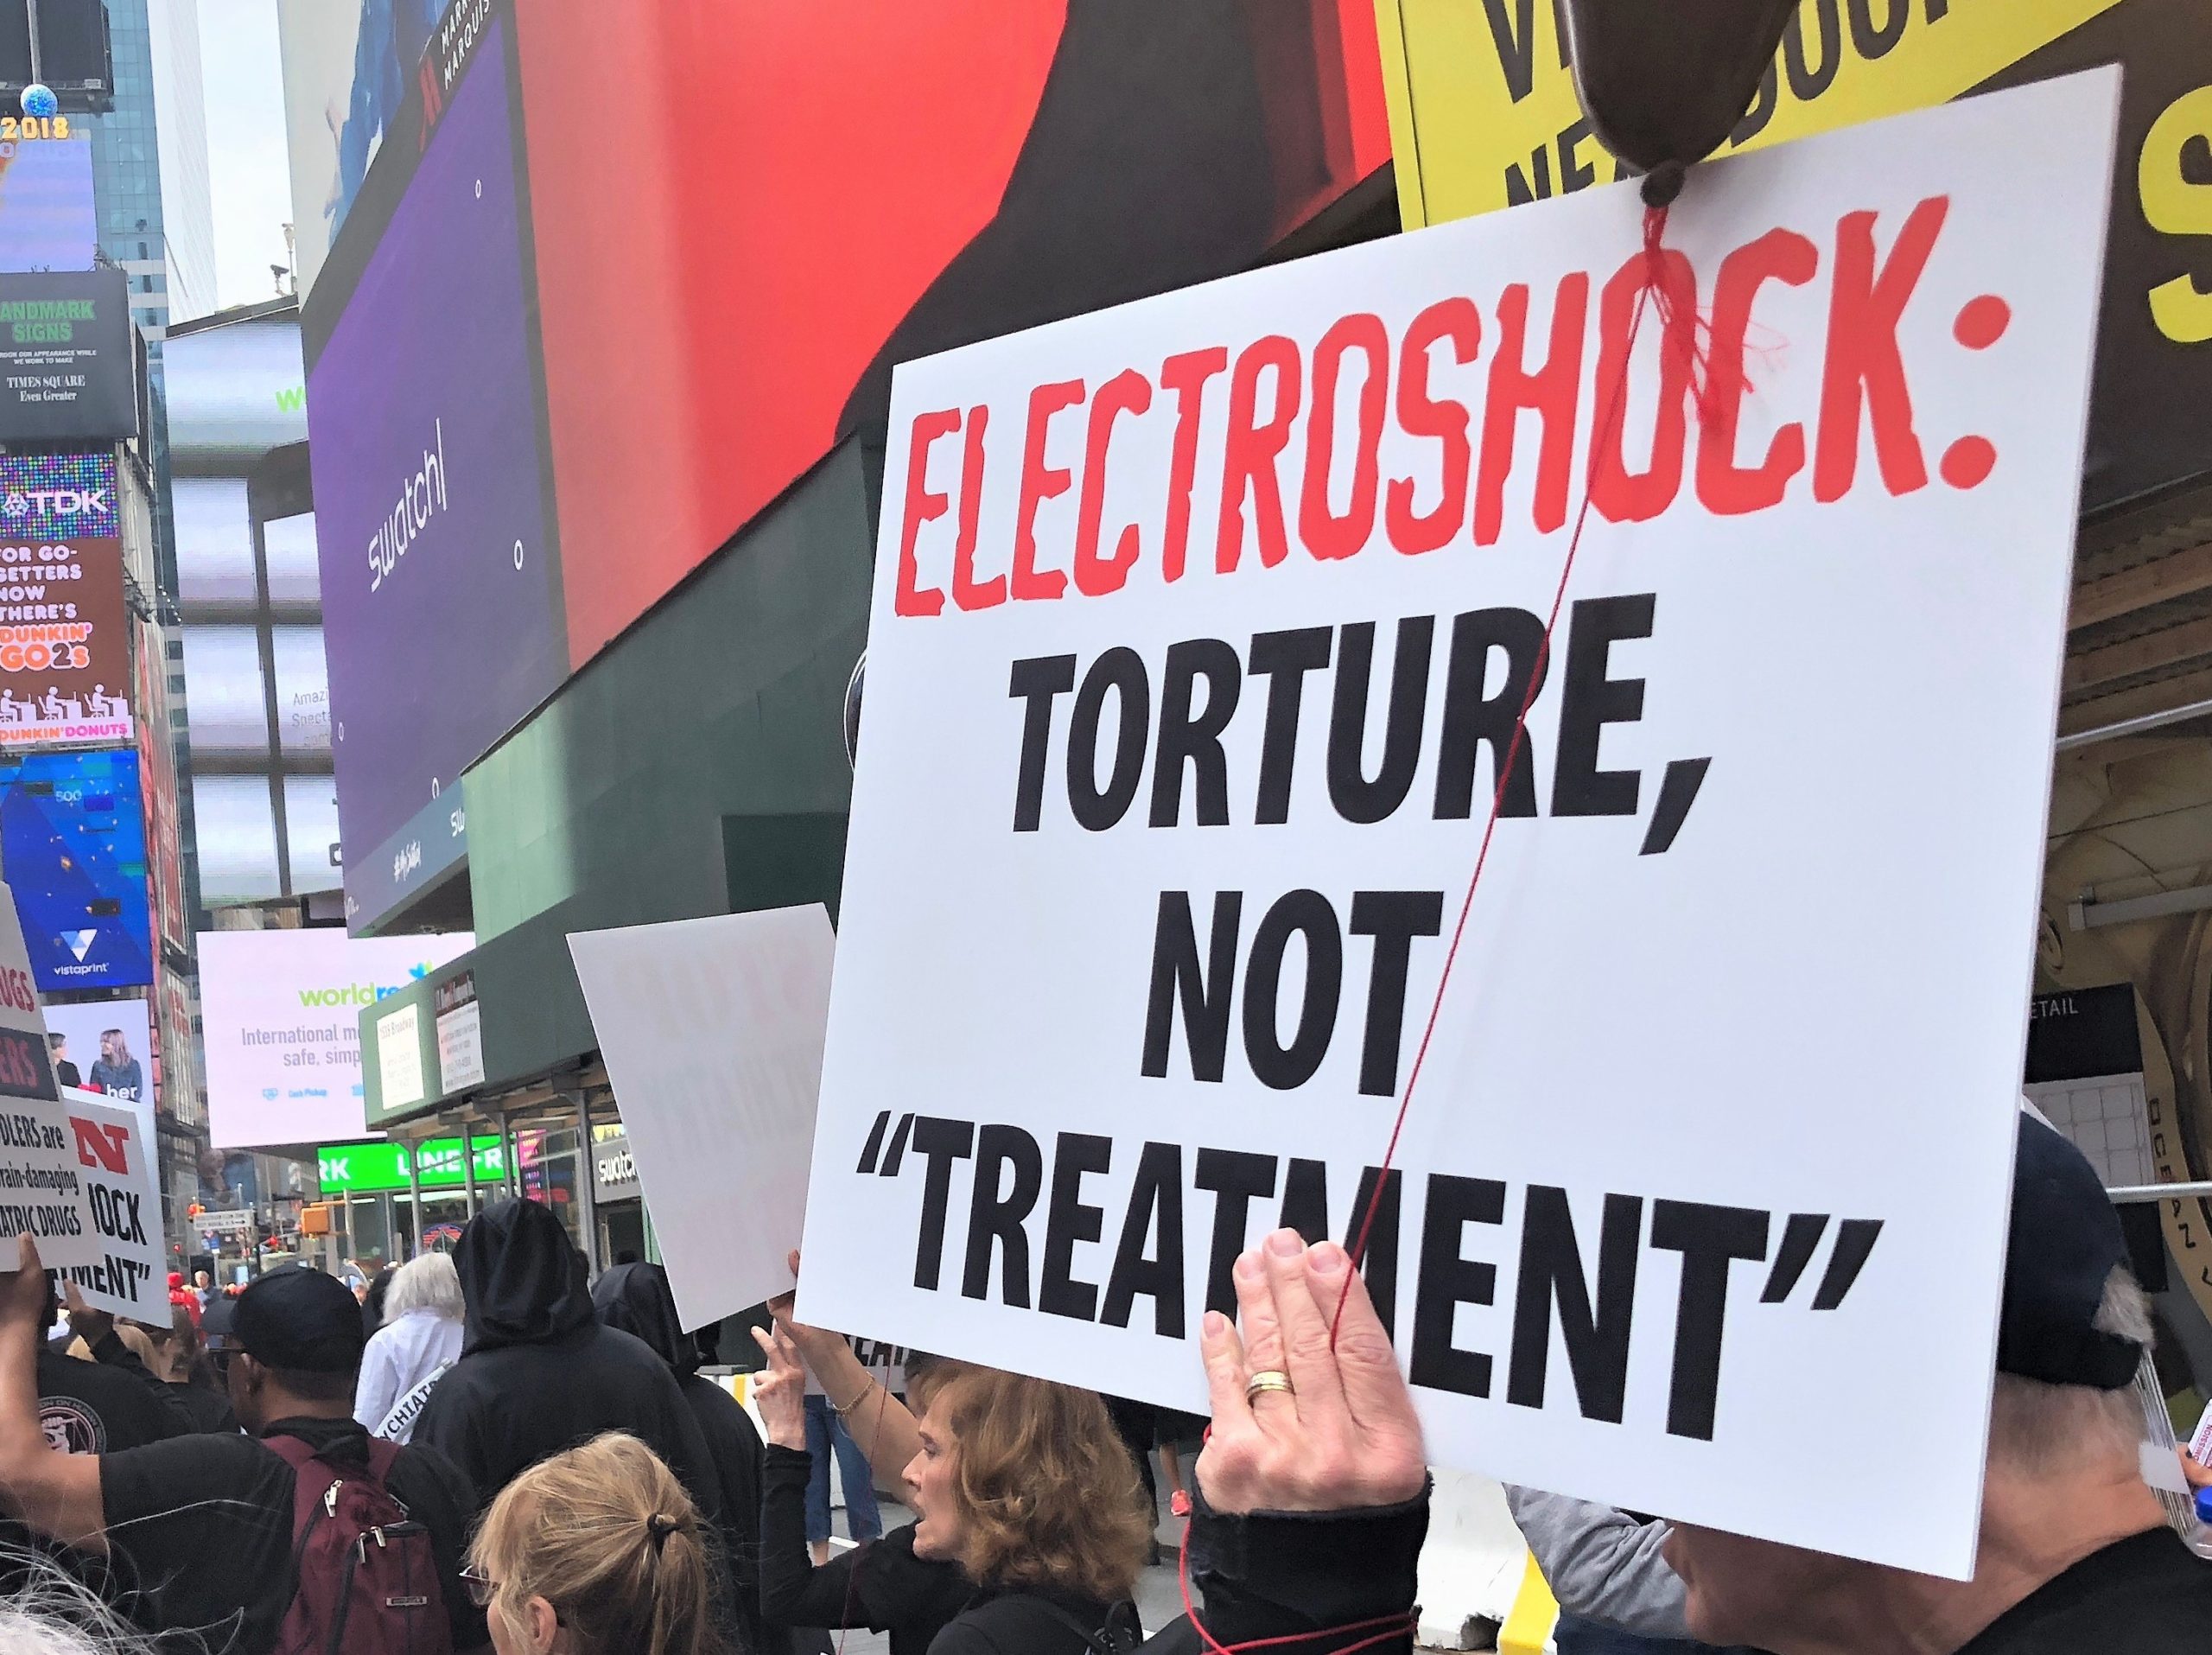 “With no clinical trials proving its safety, electroshock treatment plays Russian roulette with the lives of vulnerable people who are often ill-informed about its long-term effects, including, according to an ECT device manufacturer, permanent brain damage, as well as severe memory loss.”